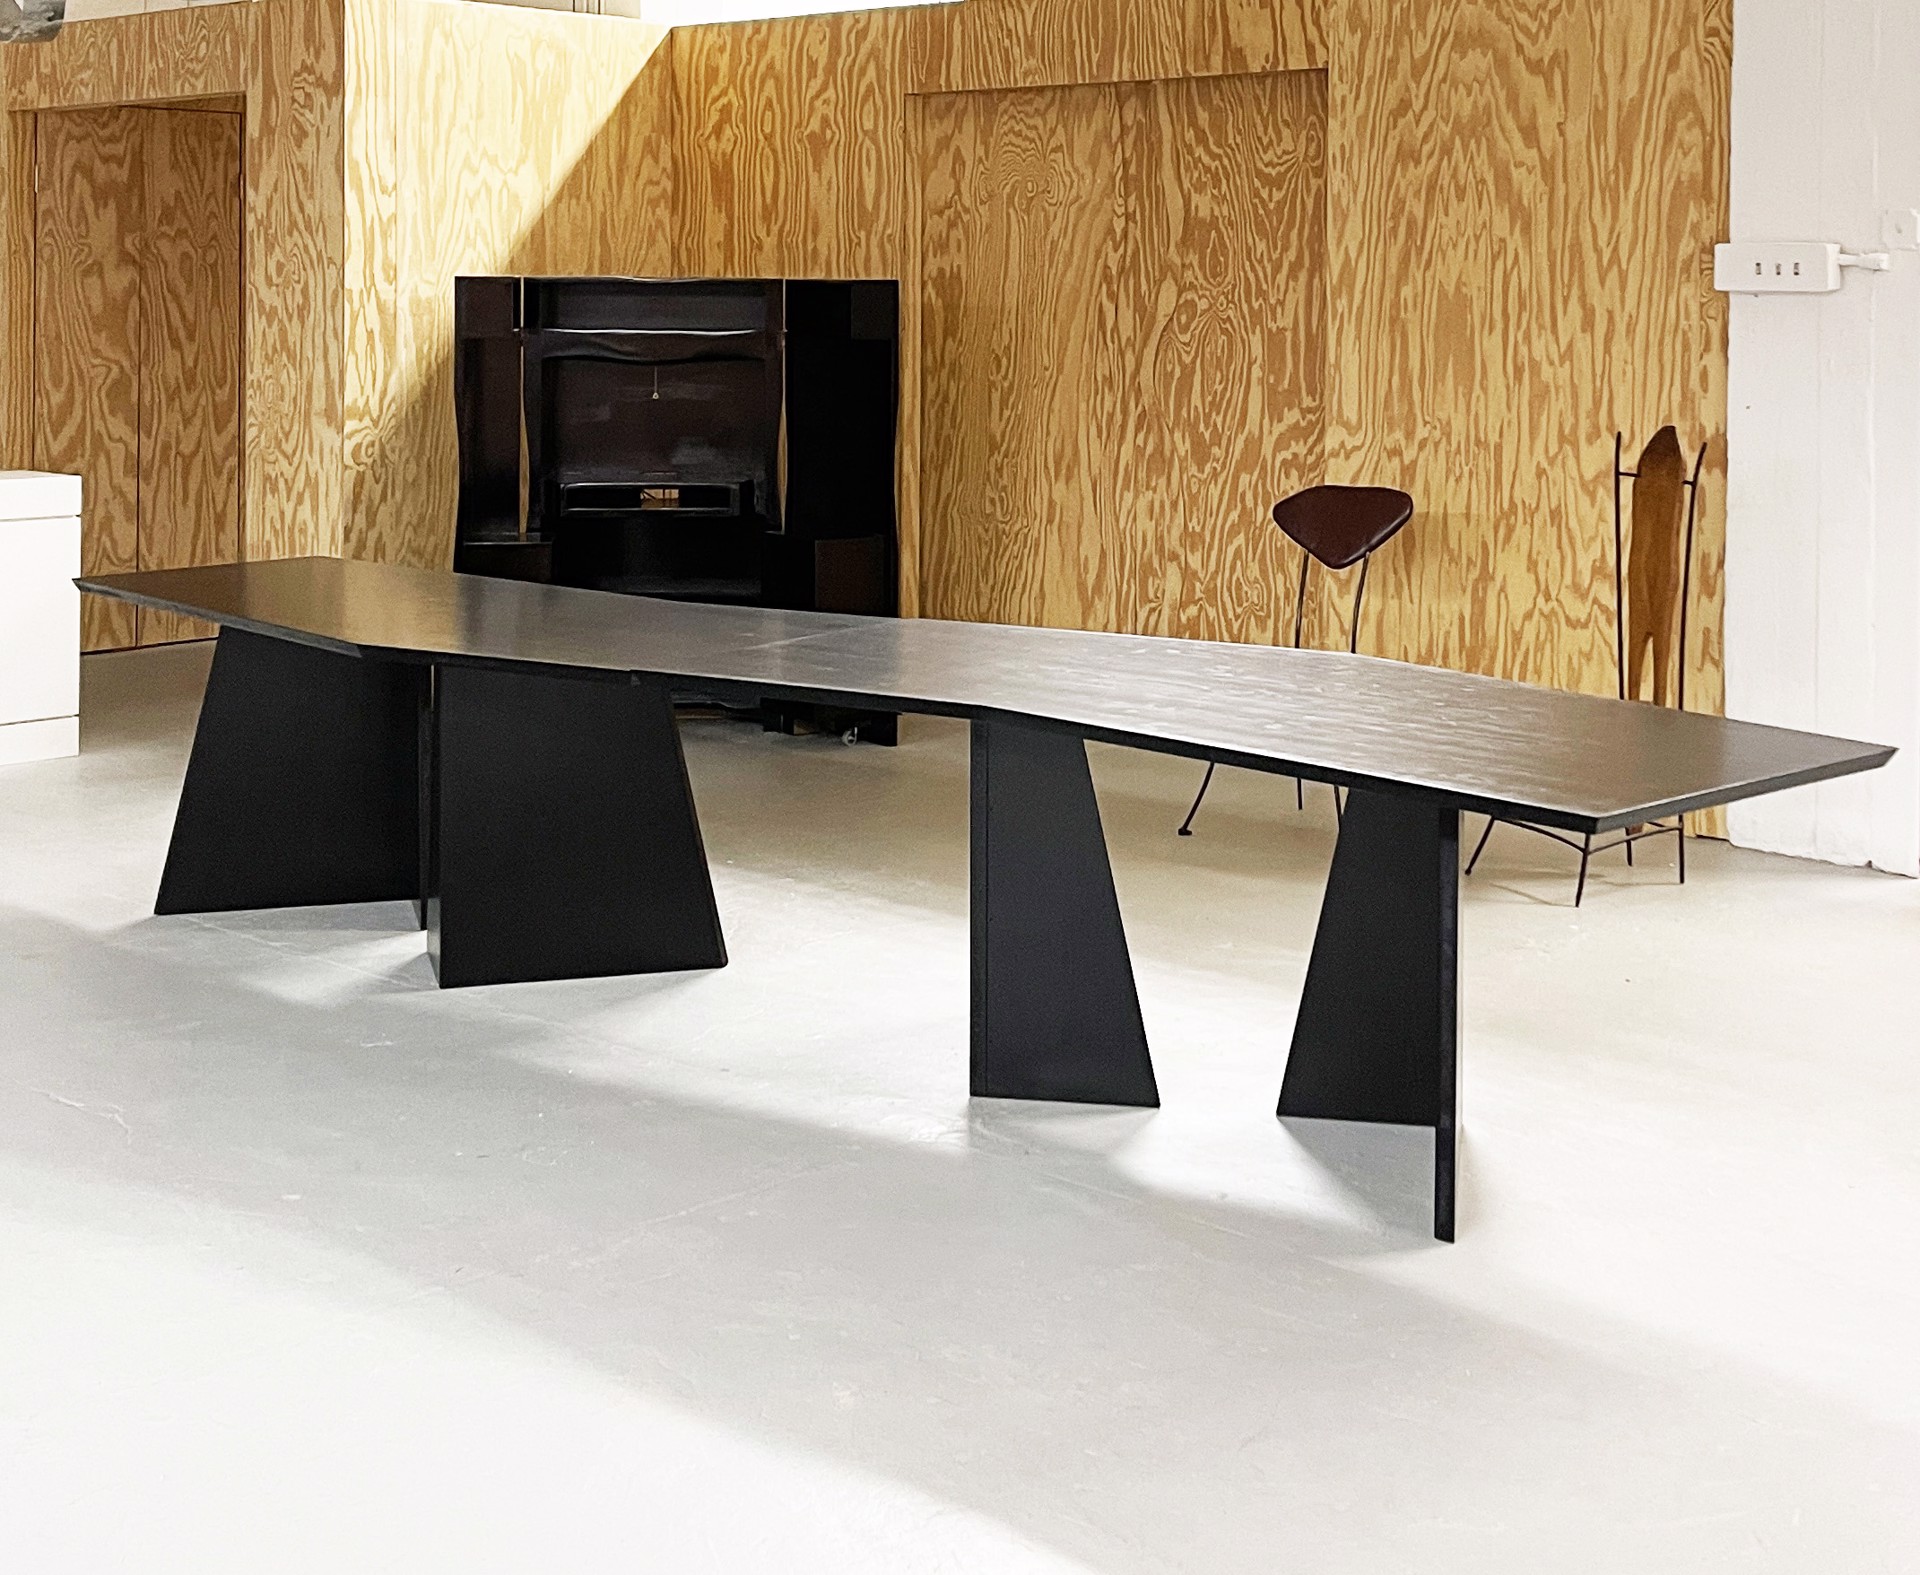 Double Dining Table / Desk "Nazca" by Jacques Jarrige